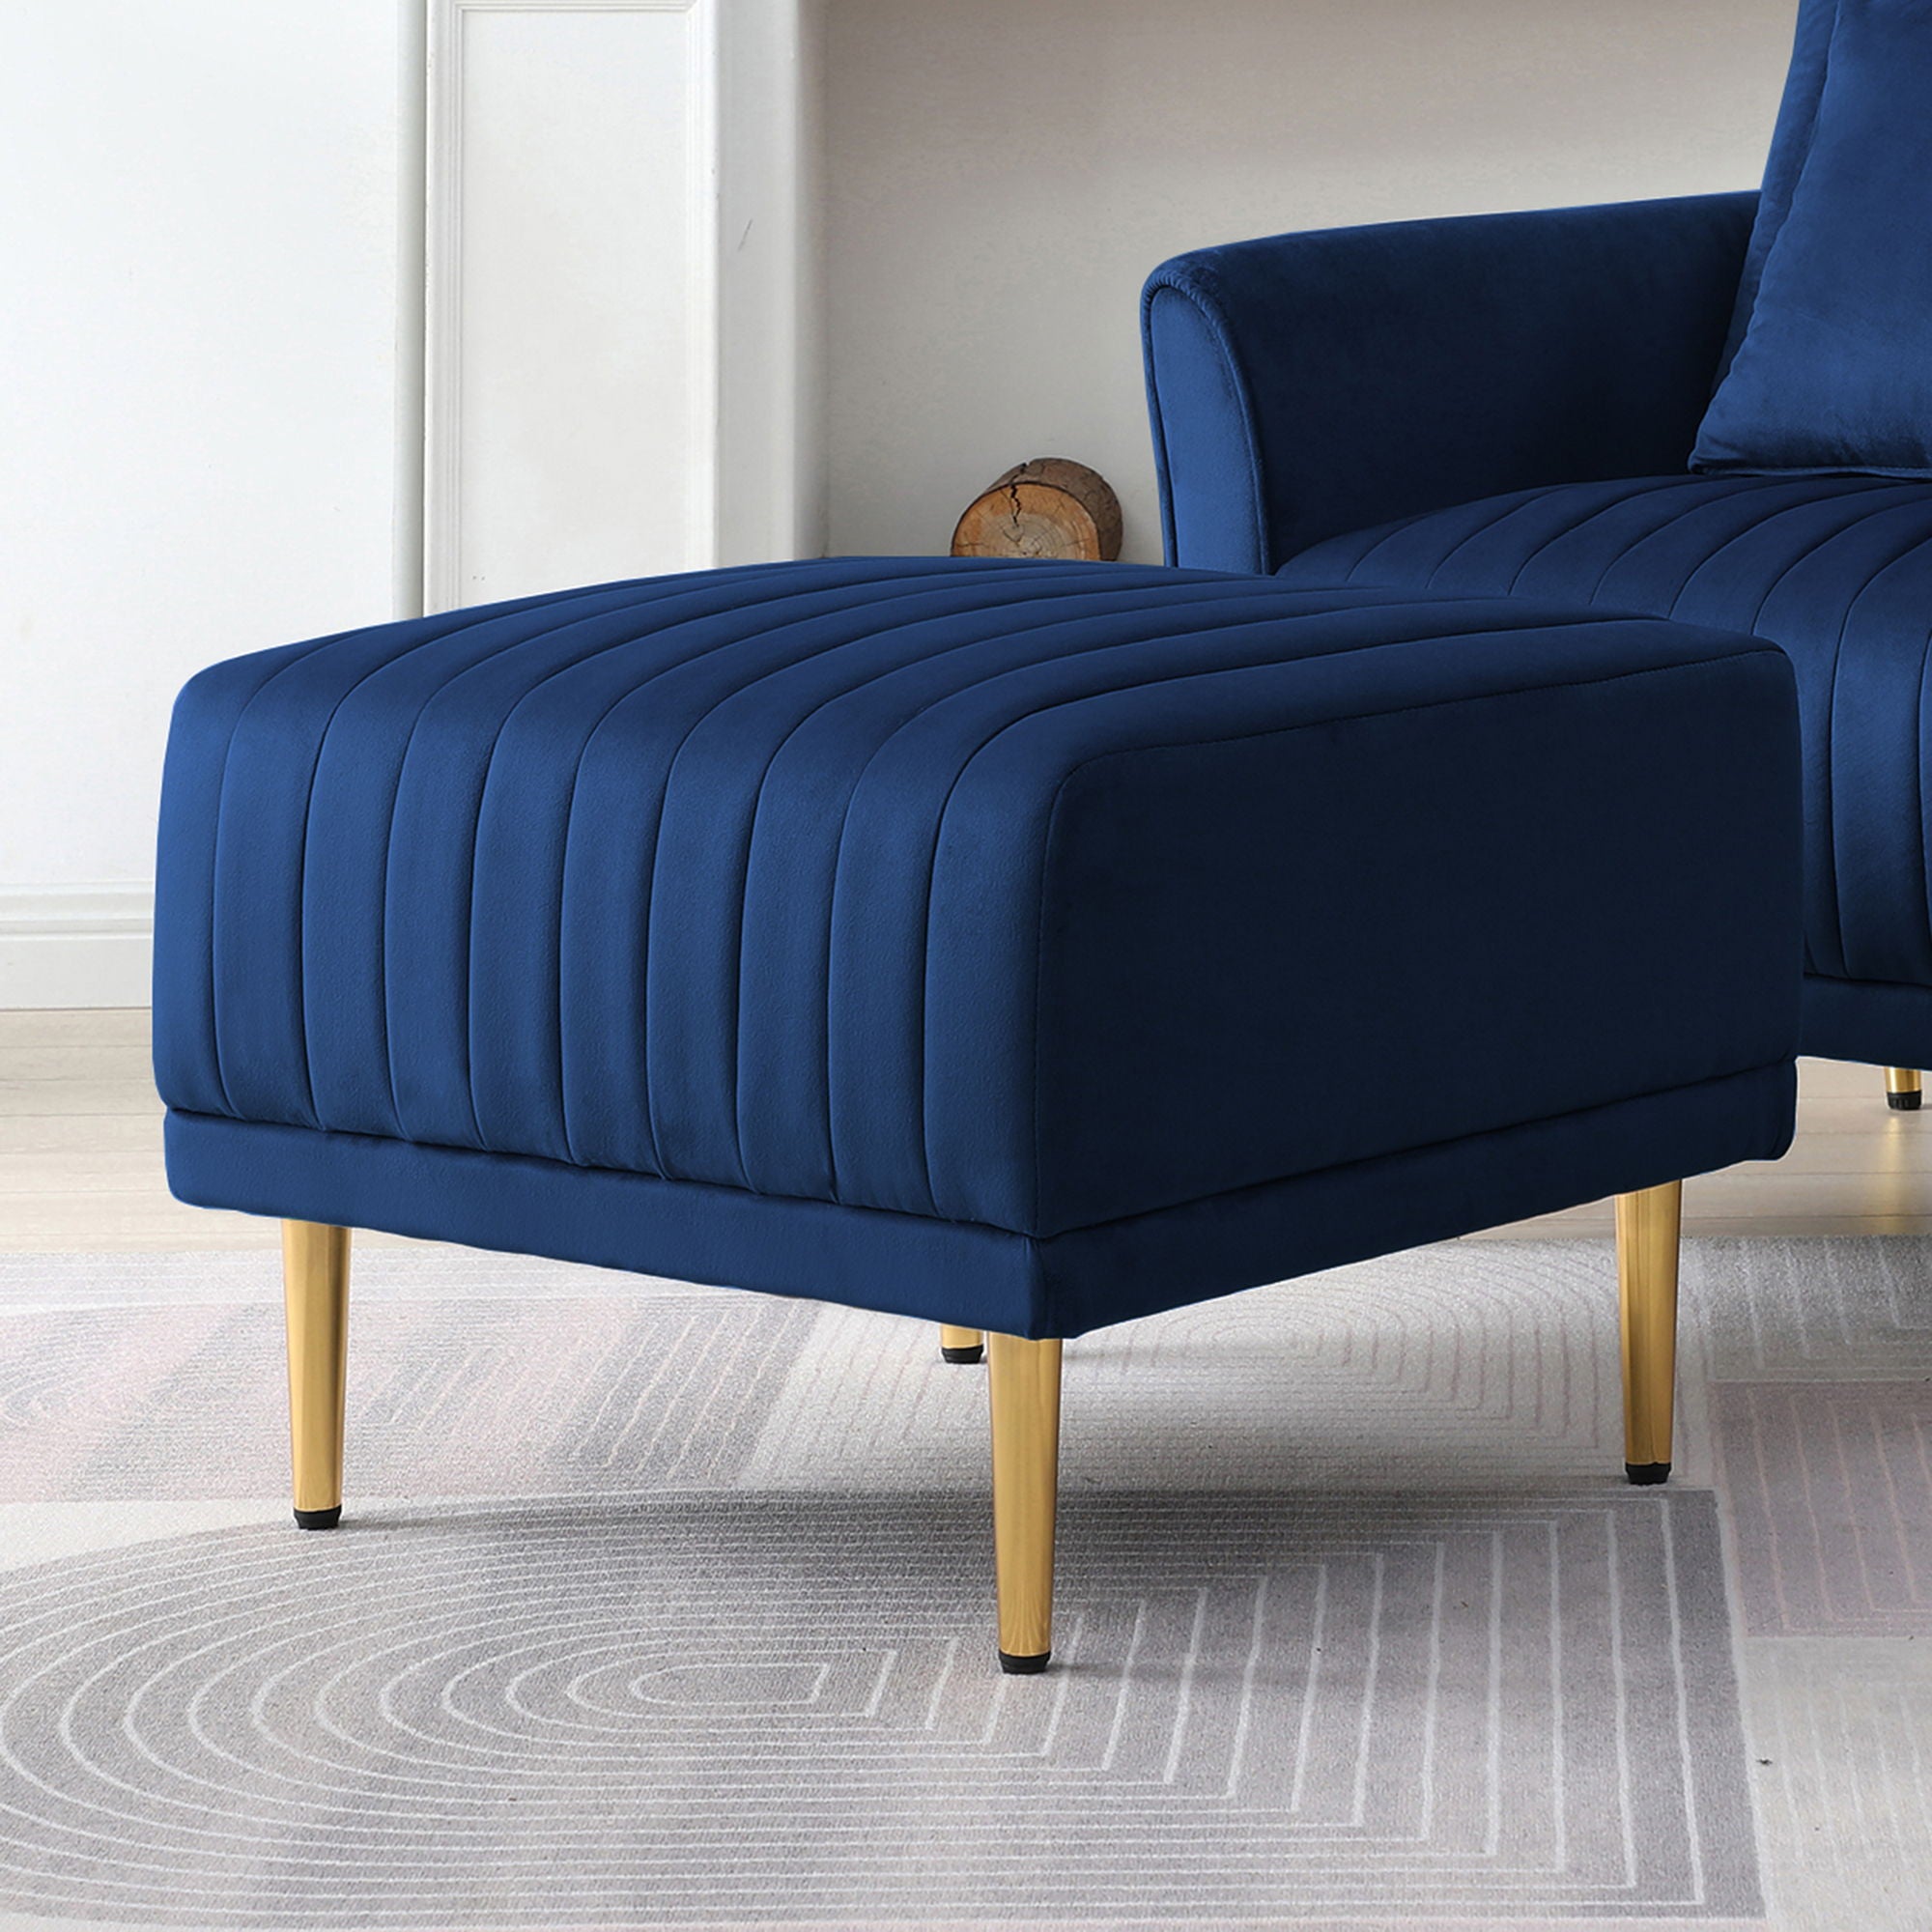 Channel Tufted Ottoman Benc Height Upholstered Velvet Footrest Stool Accent Benc Height For Entryway Living Room Bedroom - Navy Blue